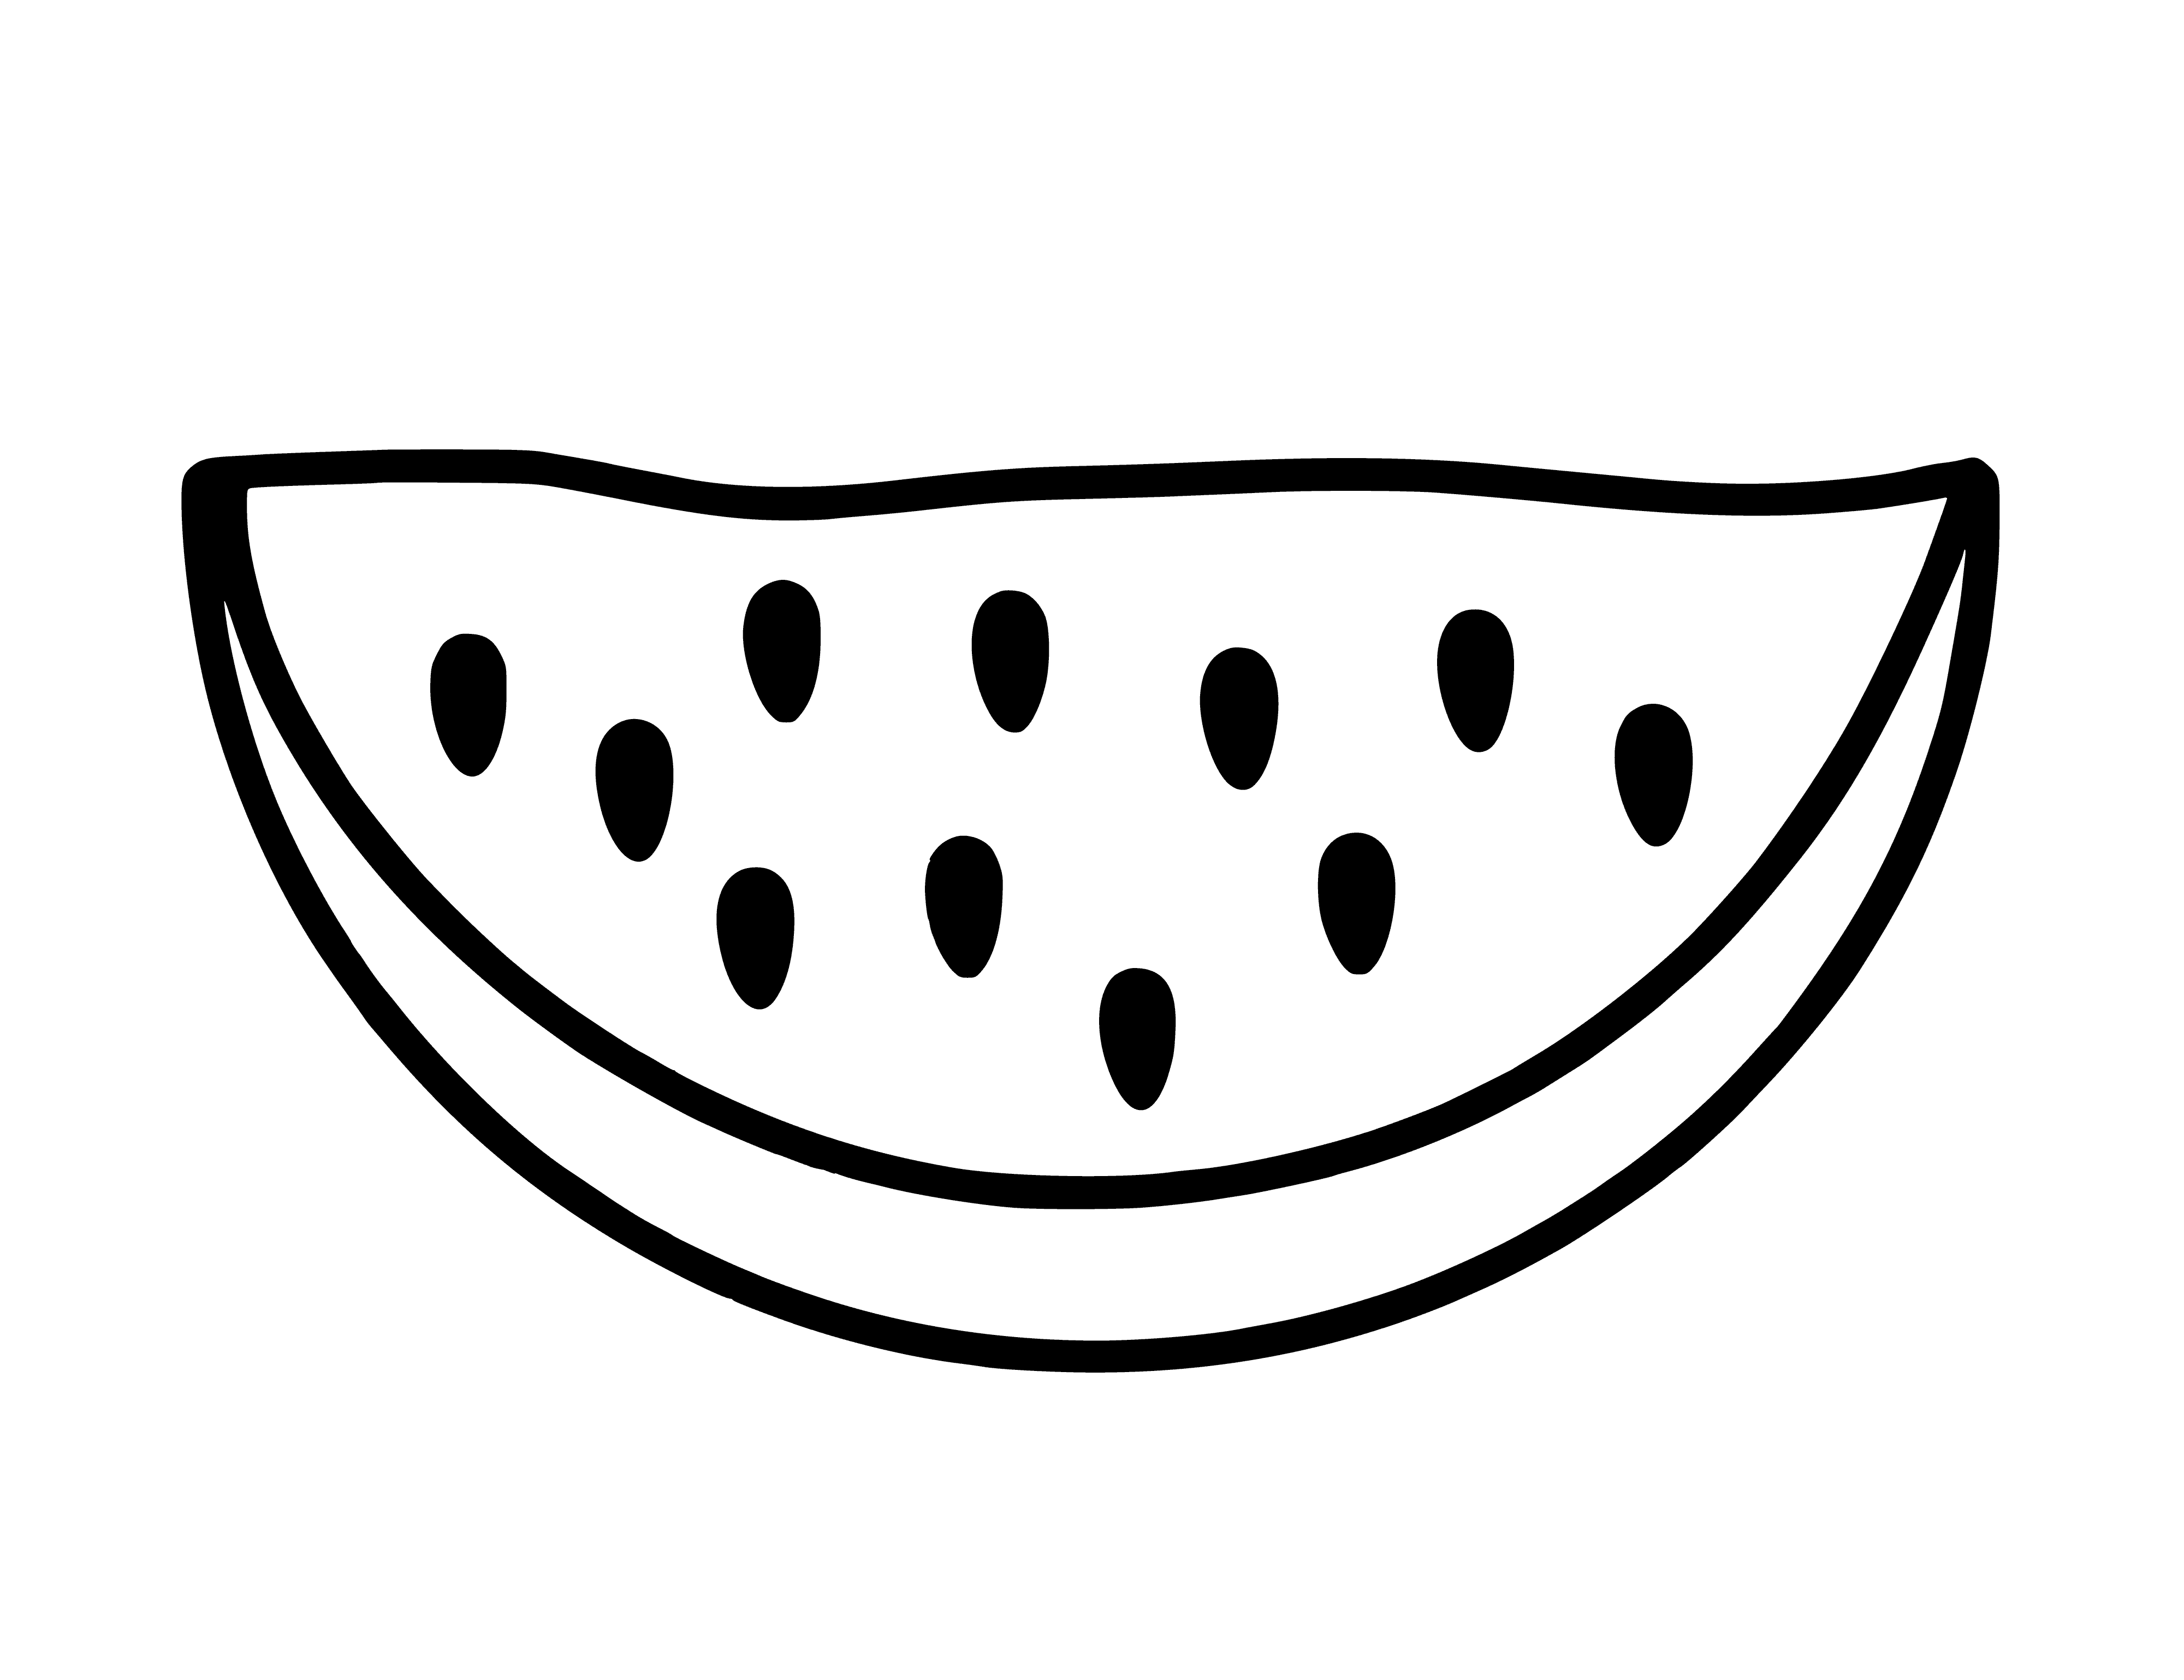 coloring page: Large watermelon with dark stripes, black seeds, cut in half, surrounded by green vine. #fruit